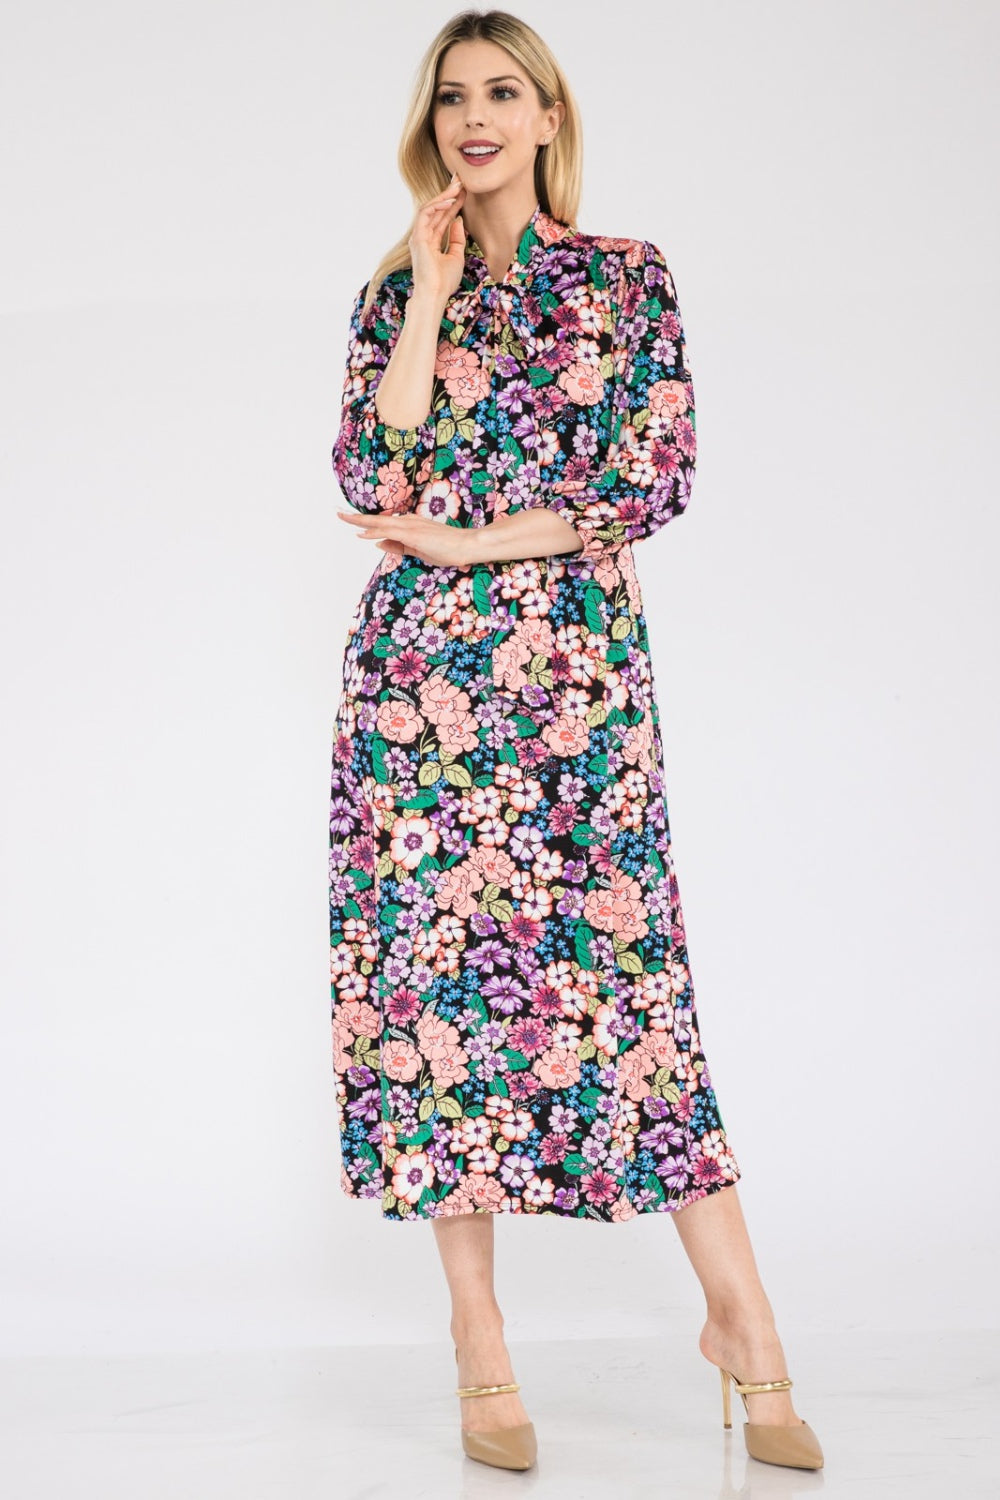 Floral Midi Dress with Bow Tied